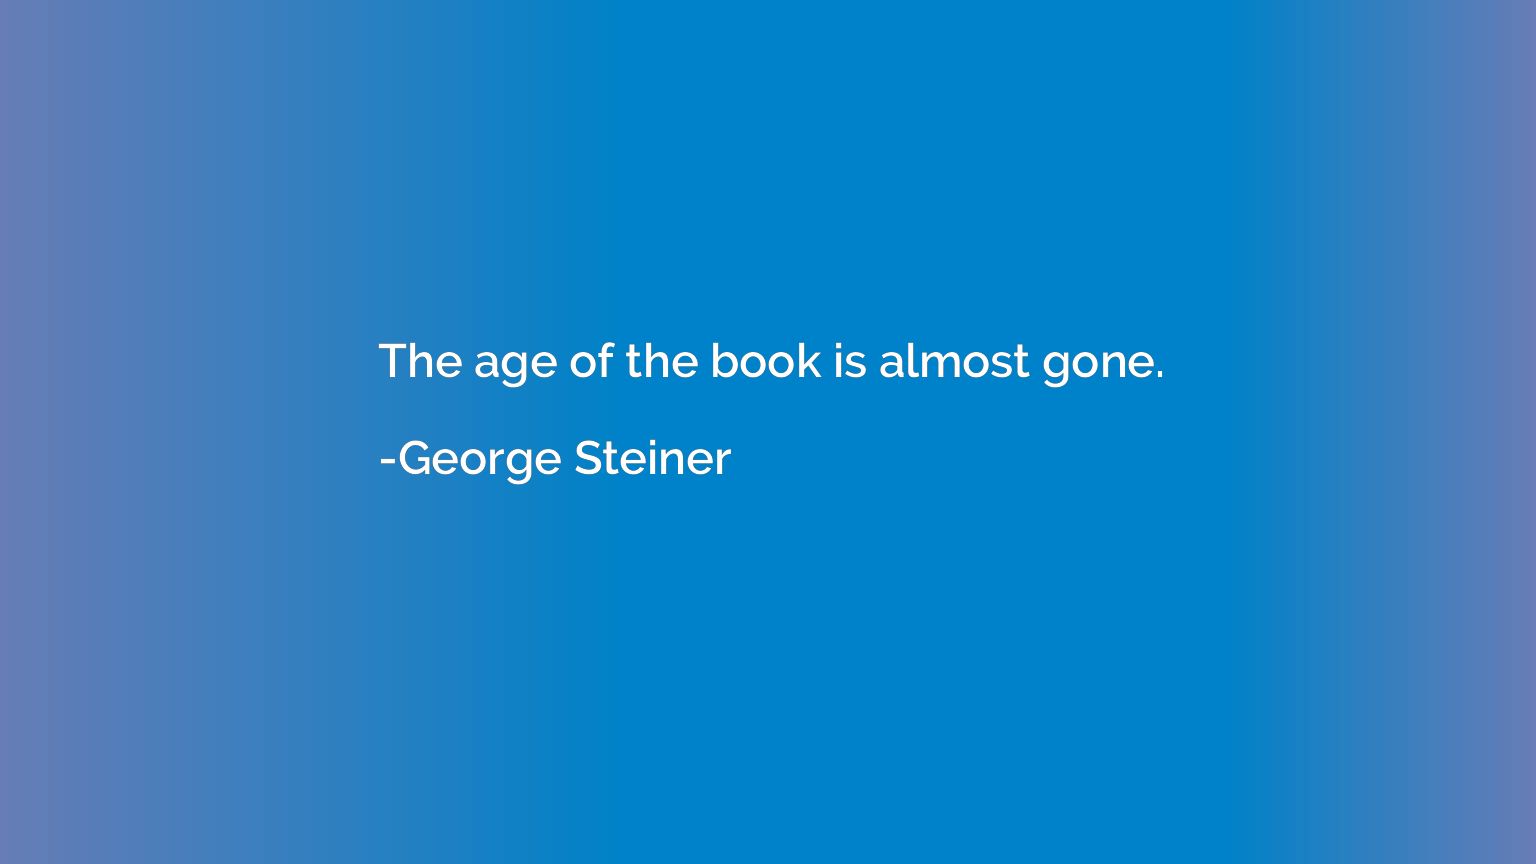 The age of the book is almost gone.